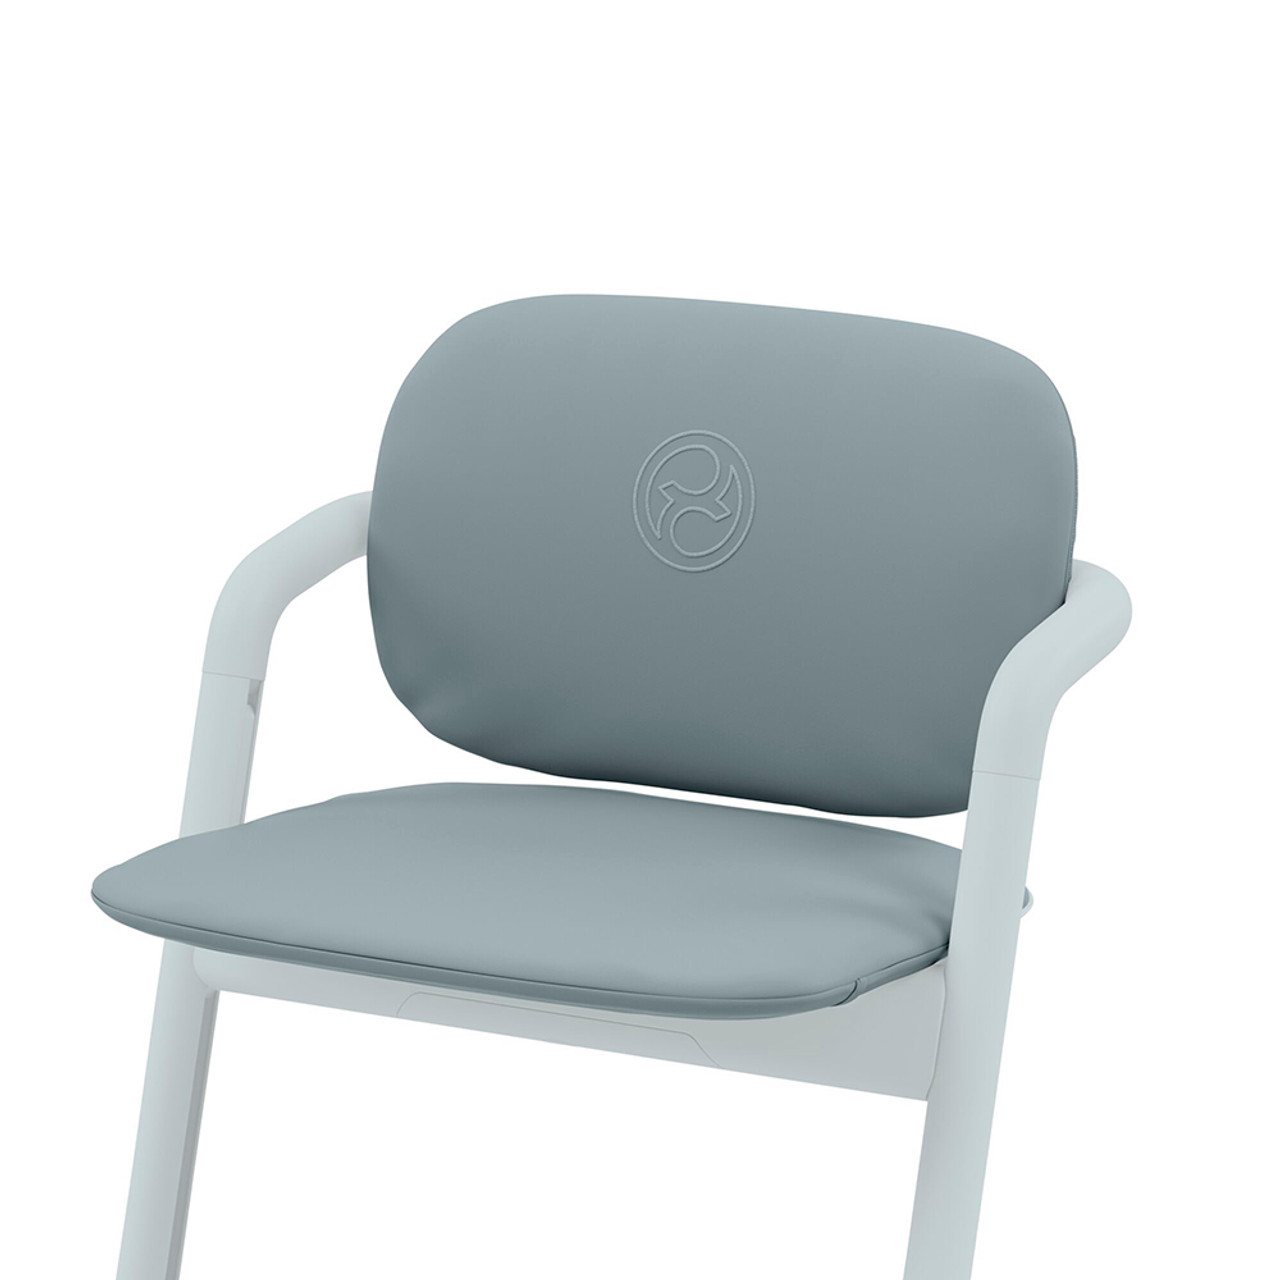 CYBEX LEMO Chair  The CYBEX LEMO Chair offers a sustainable